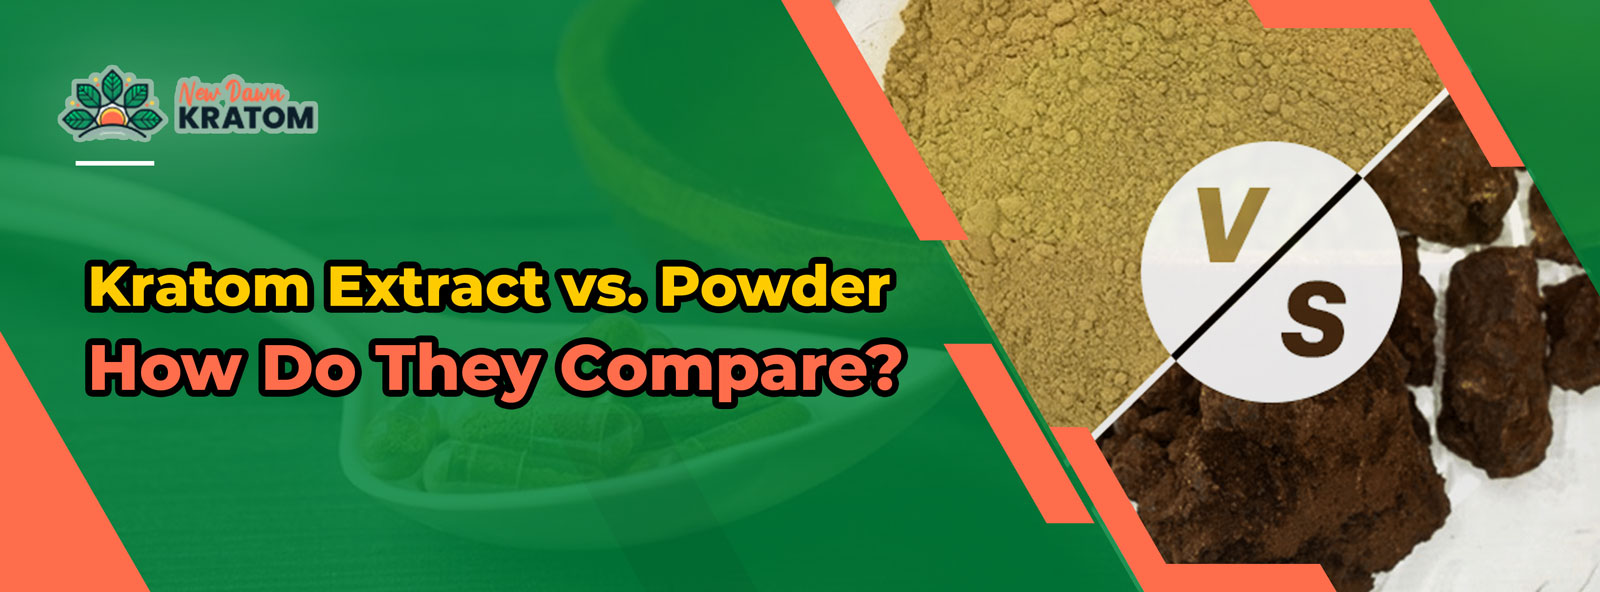 kratom extract vs. powder – how do they compare?